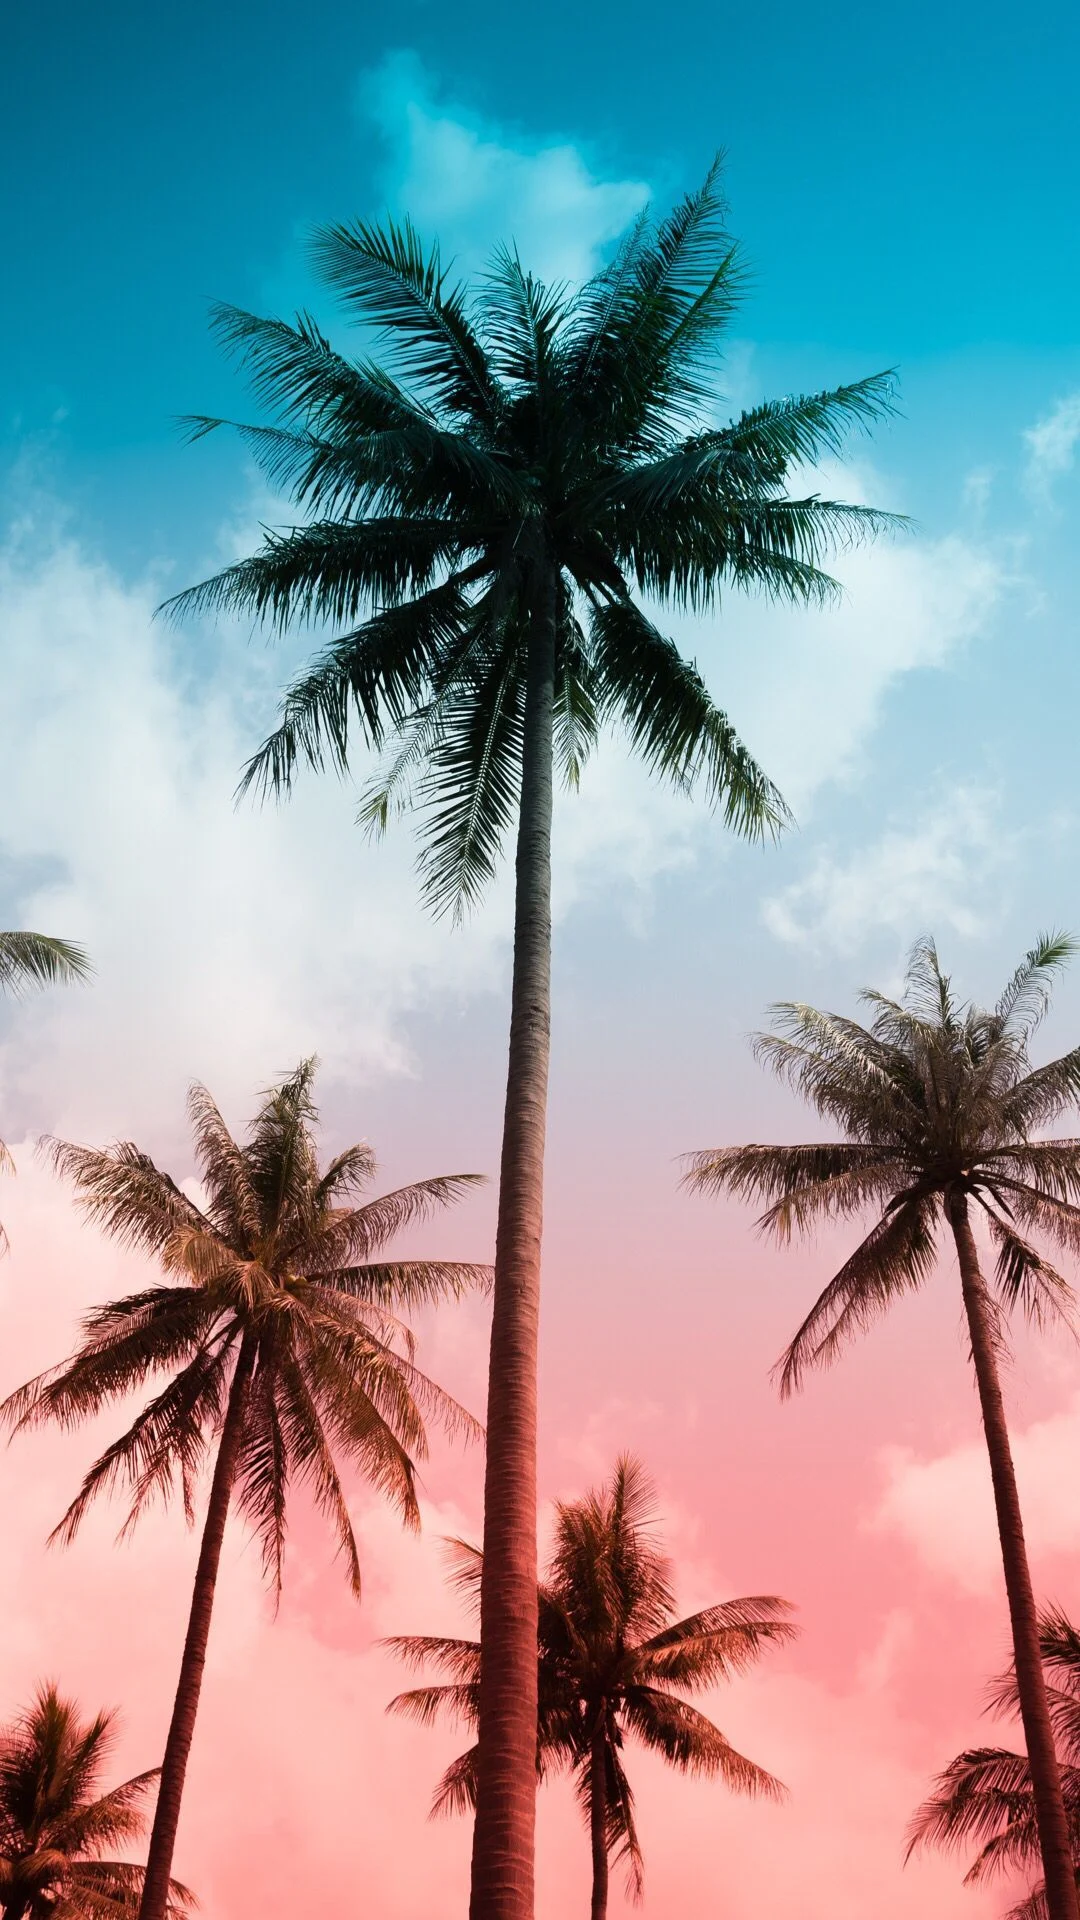 A group of palm trees in front - Tropical, palm tree, Miami, Hawaii